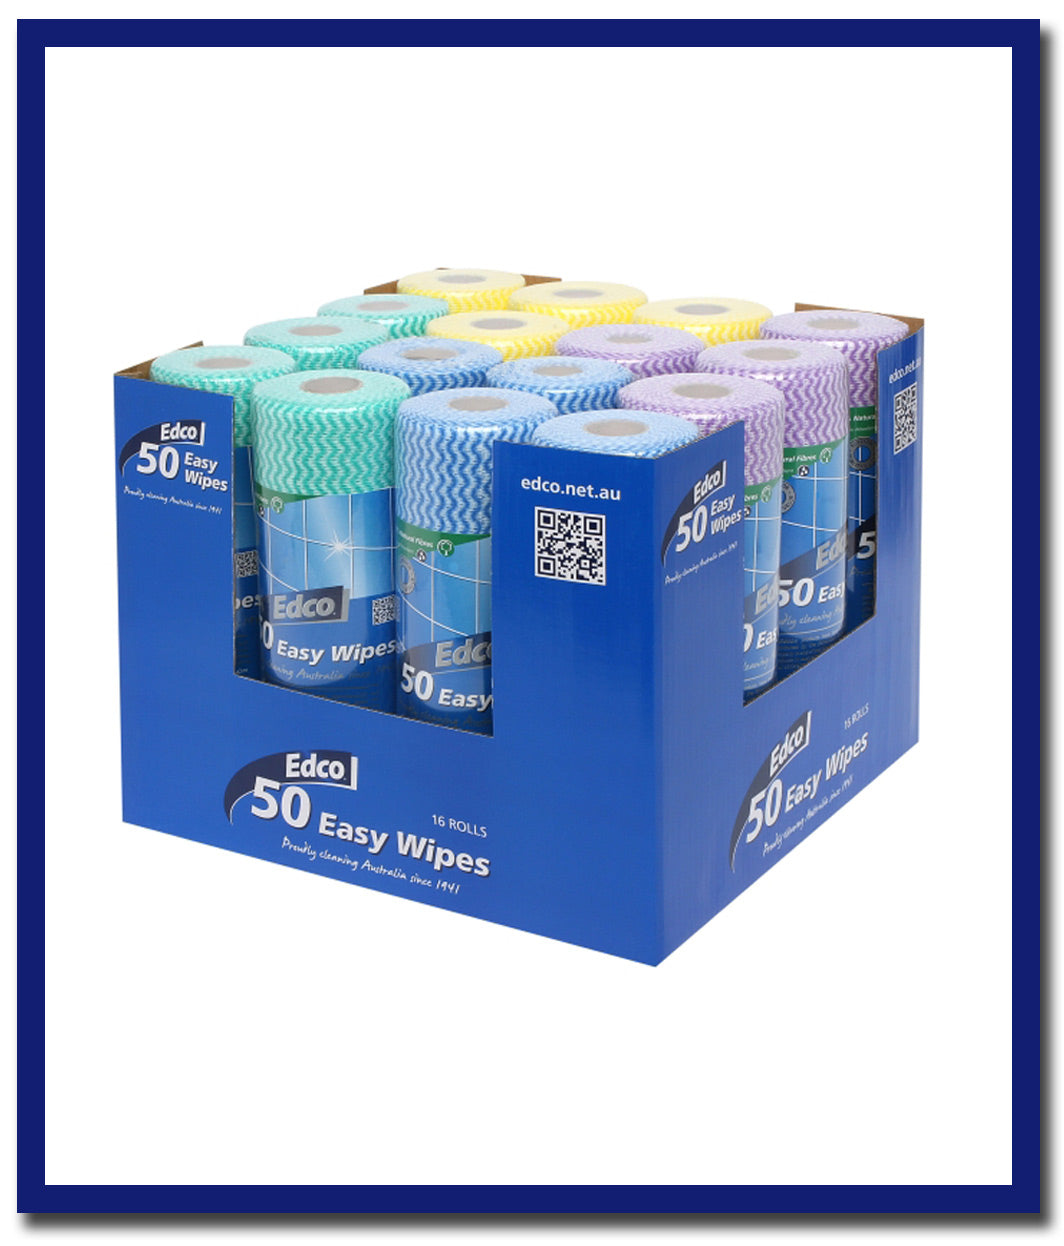 Edco Easy Wipes - 50 Sheets Per Roll - Stone Doctor Australia - Cleaning > Consumable Wipes > Retail